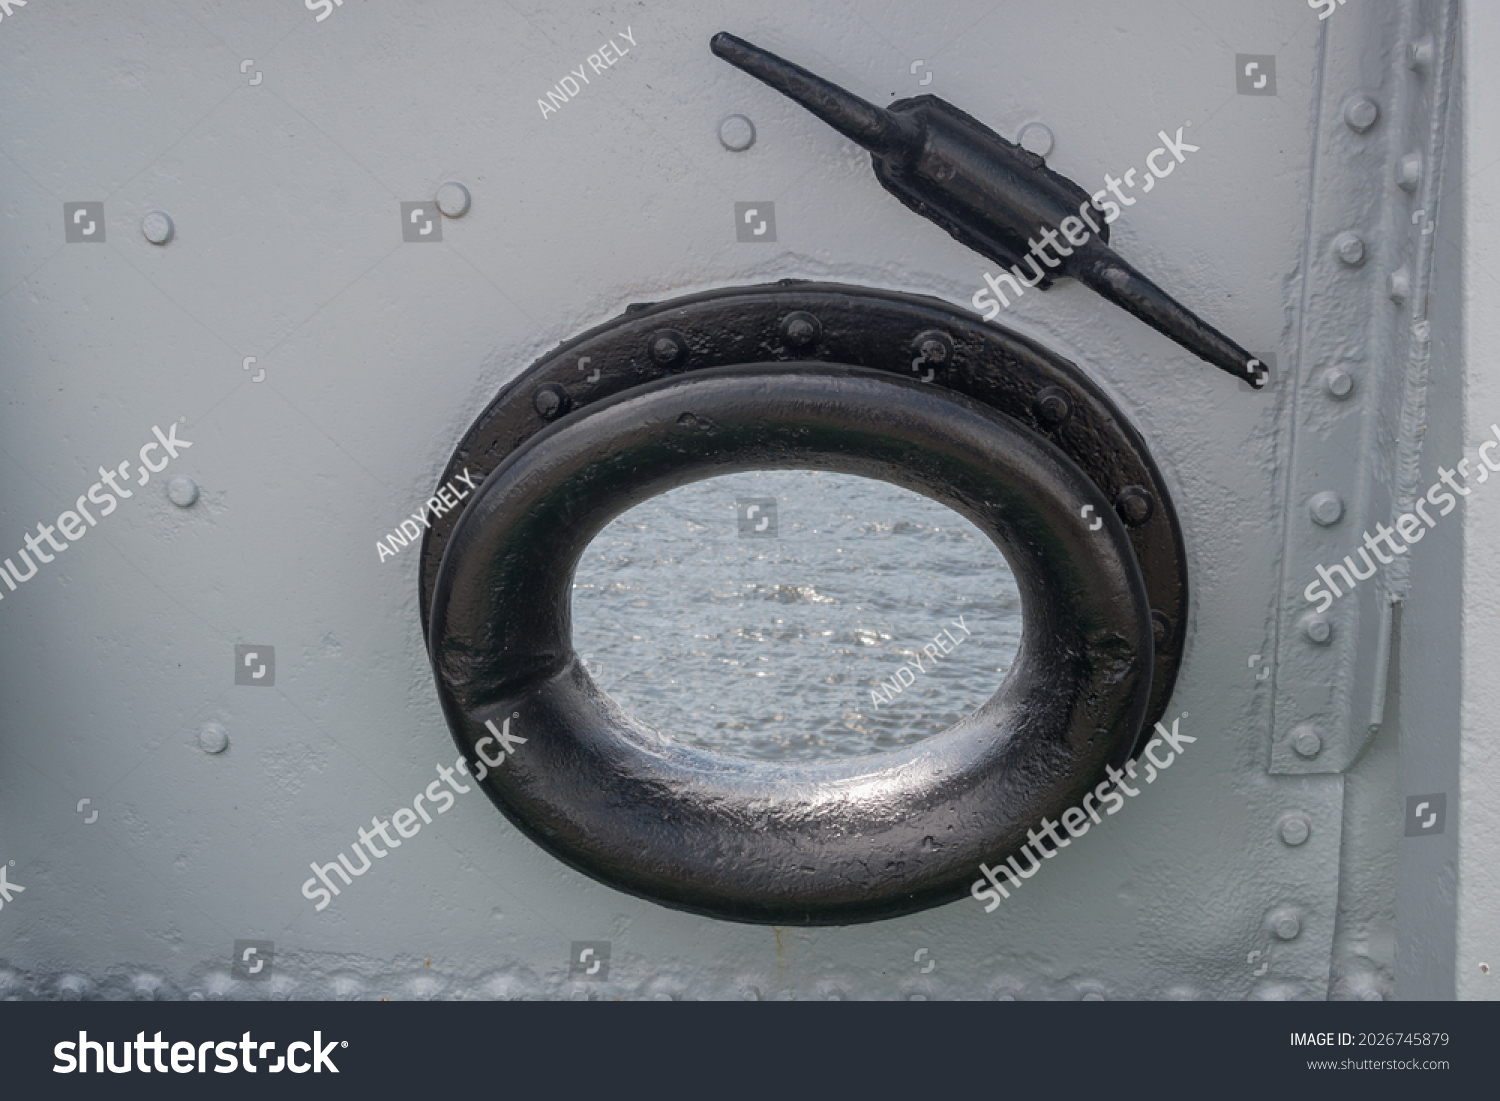 Mooring fairlead with round hole and black cast-iron ring with smooth rounding on ship is installed in gray riveted bulwark. Above is casted horn nearby. Sea water is visible in opening of fairlead. #2026745879